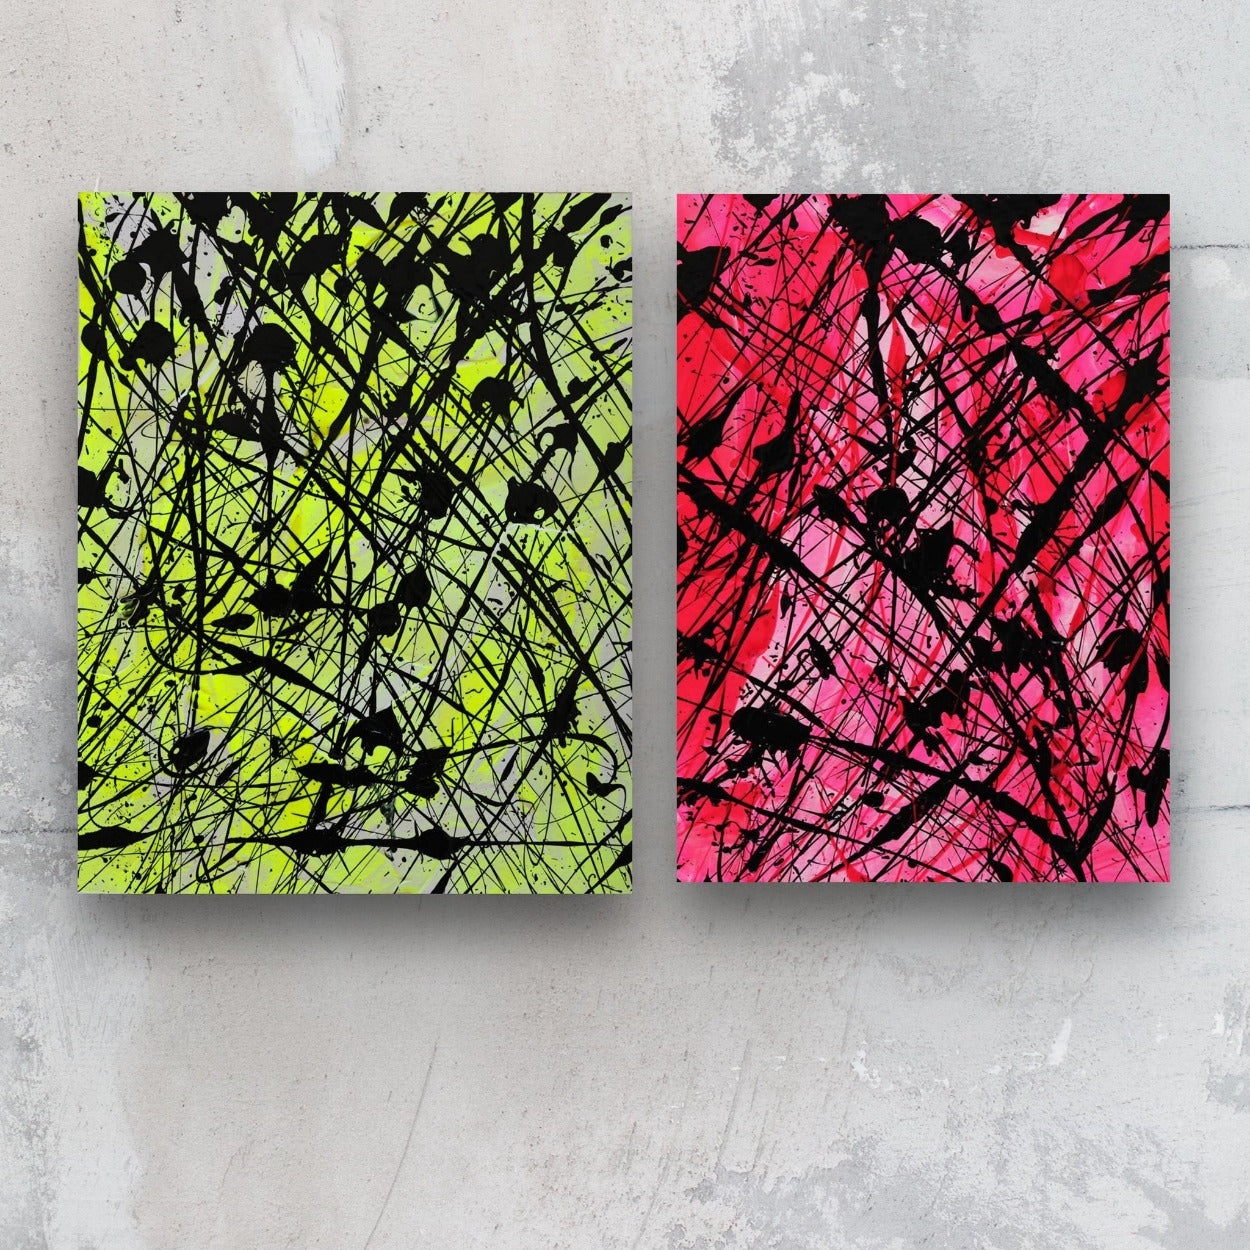 From left, neon I and Neon II original art on paper by Bridget Bradley. Neon I in Neon yellow and Neon II in neon pinks both with action painting in black. Buy as an art set and save!